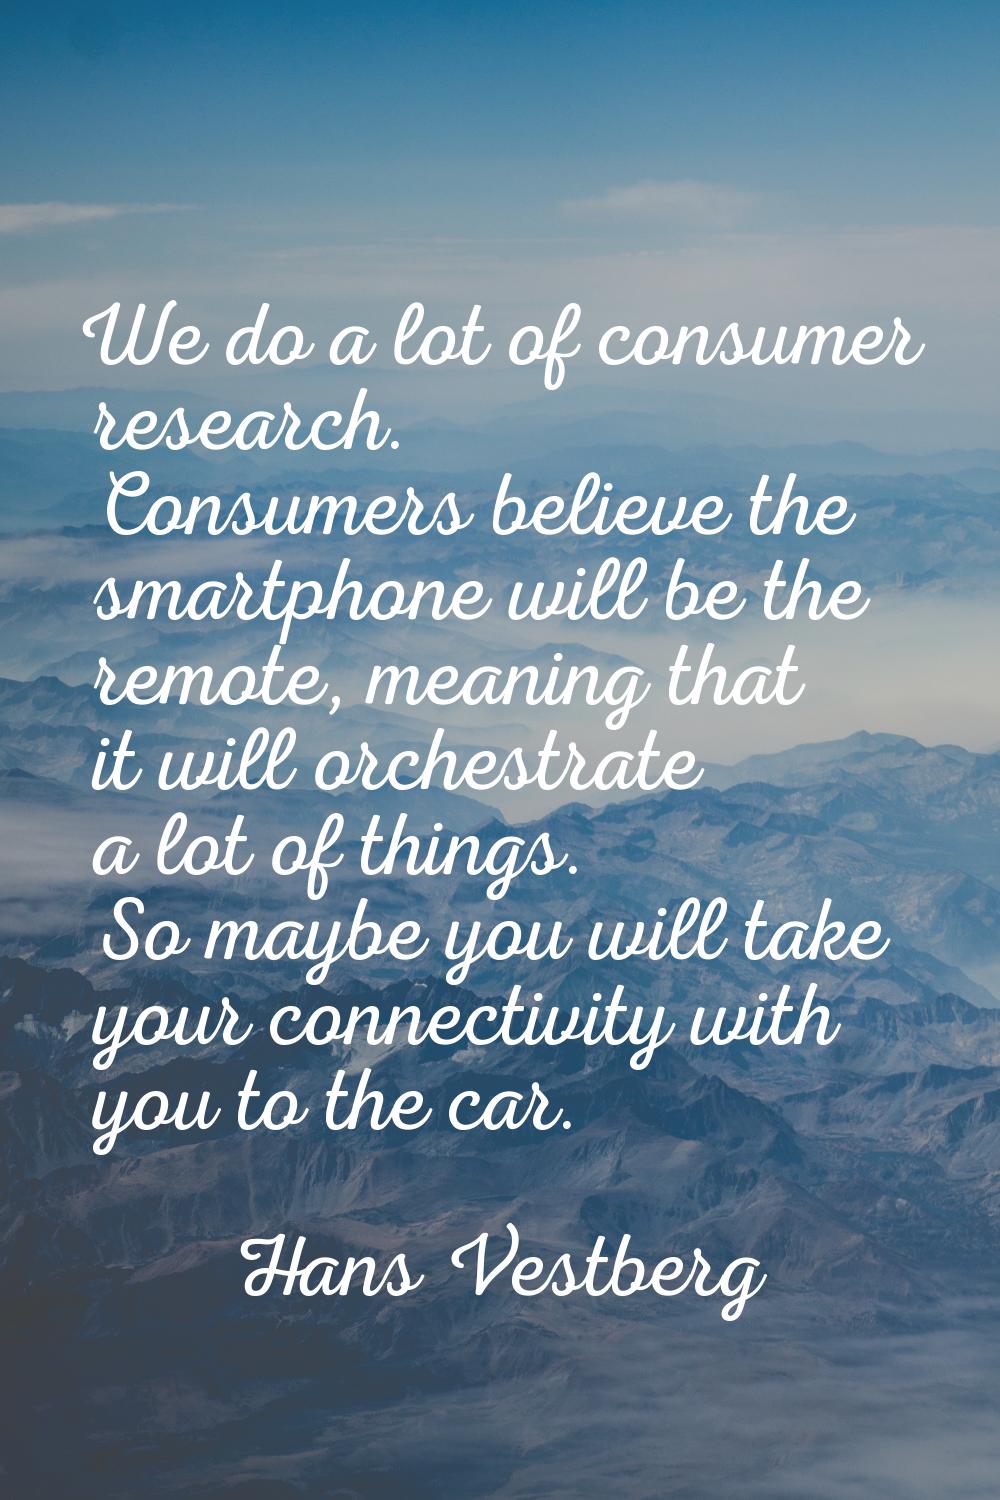 We do a lot of consumer research. Consumers believe the smartphone will be the remote, meaning that